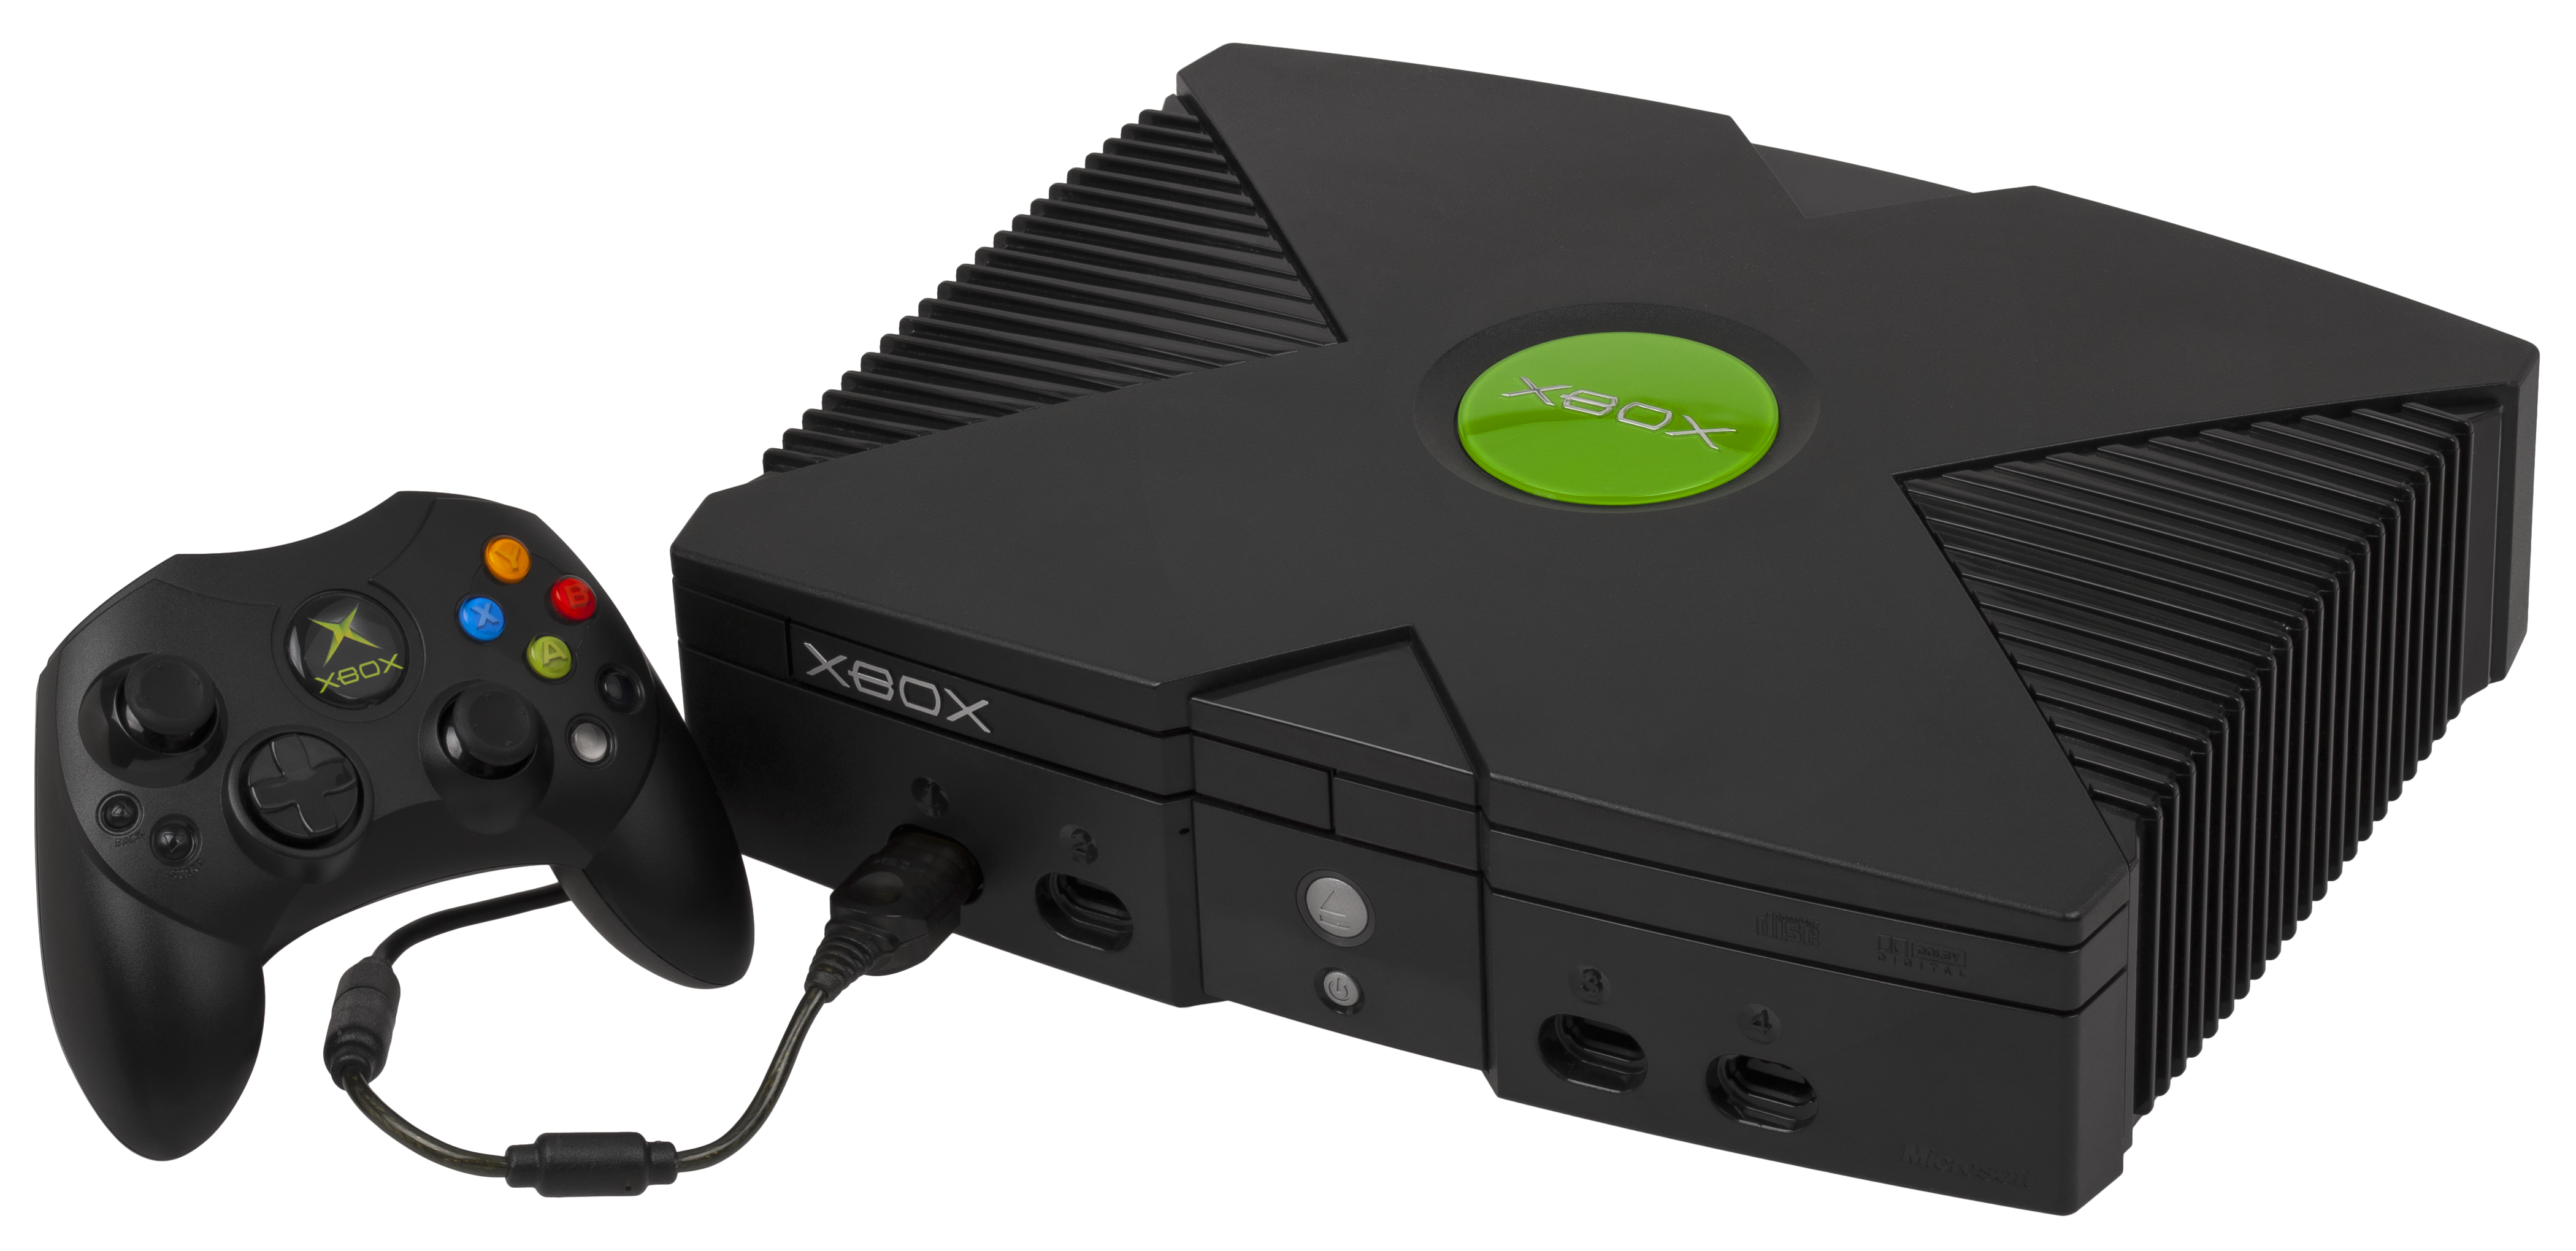 PNG File Name: Xbox PNG Trans